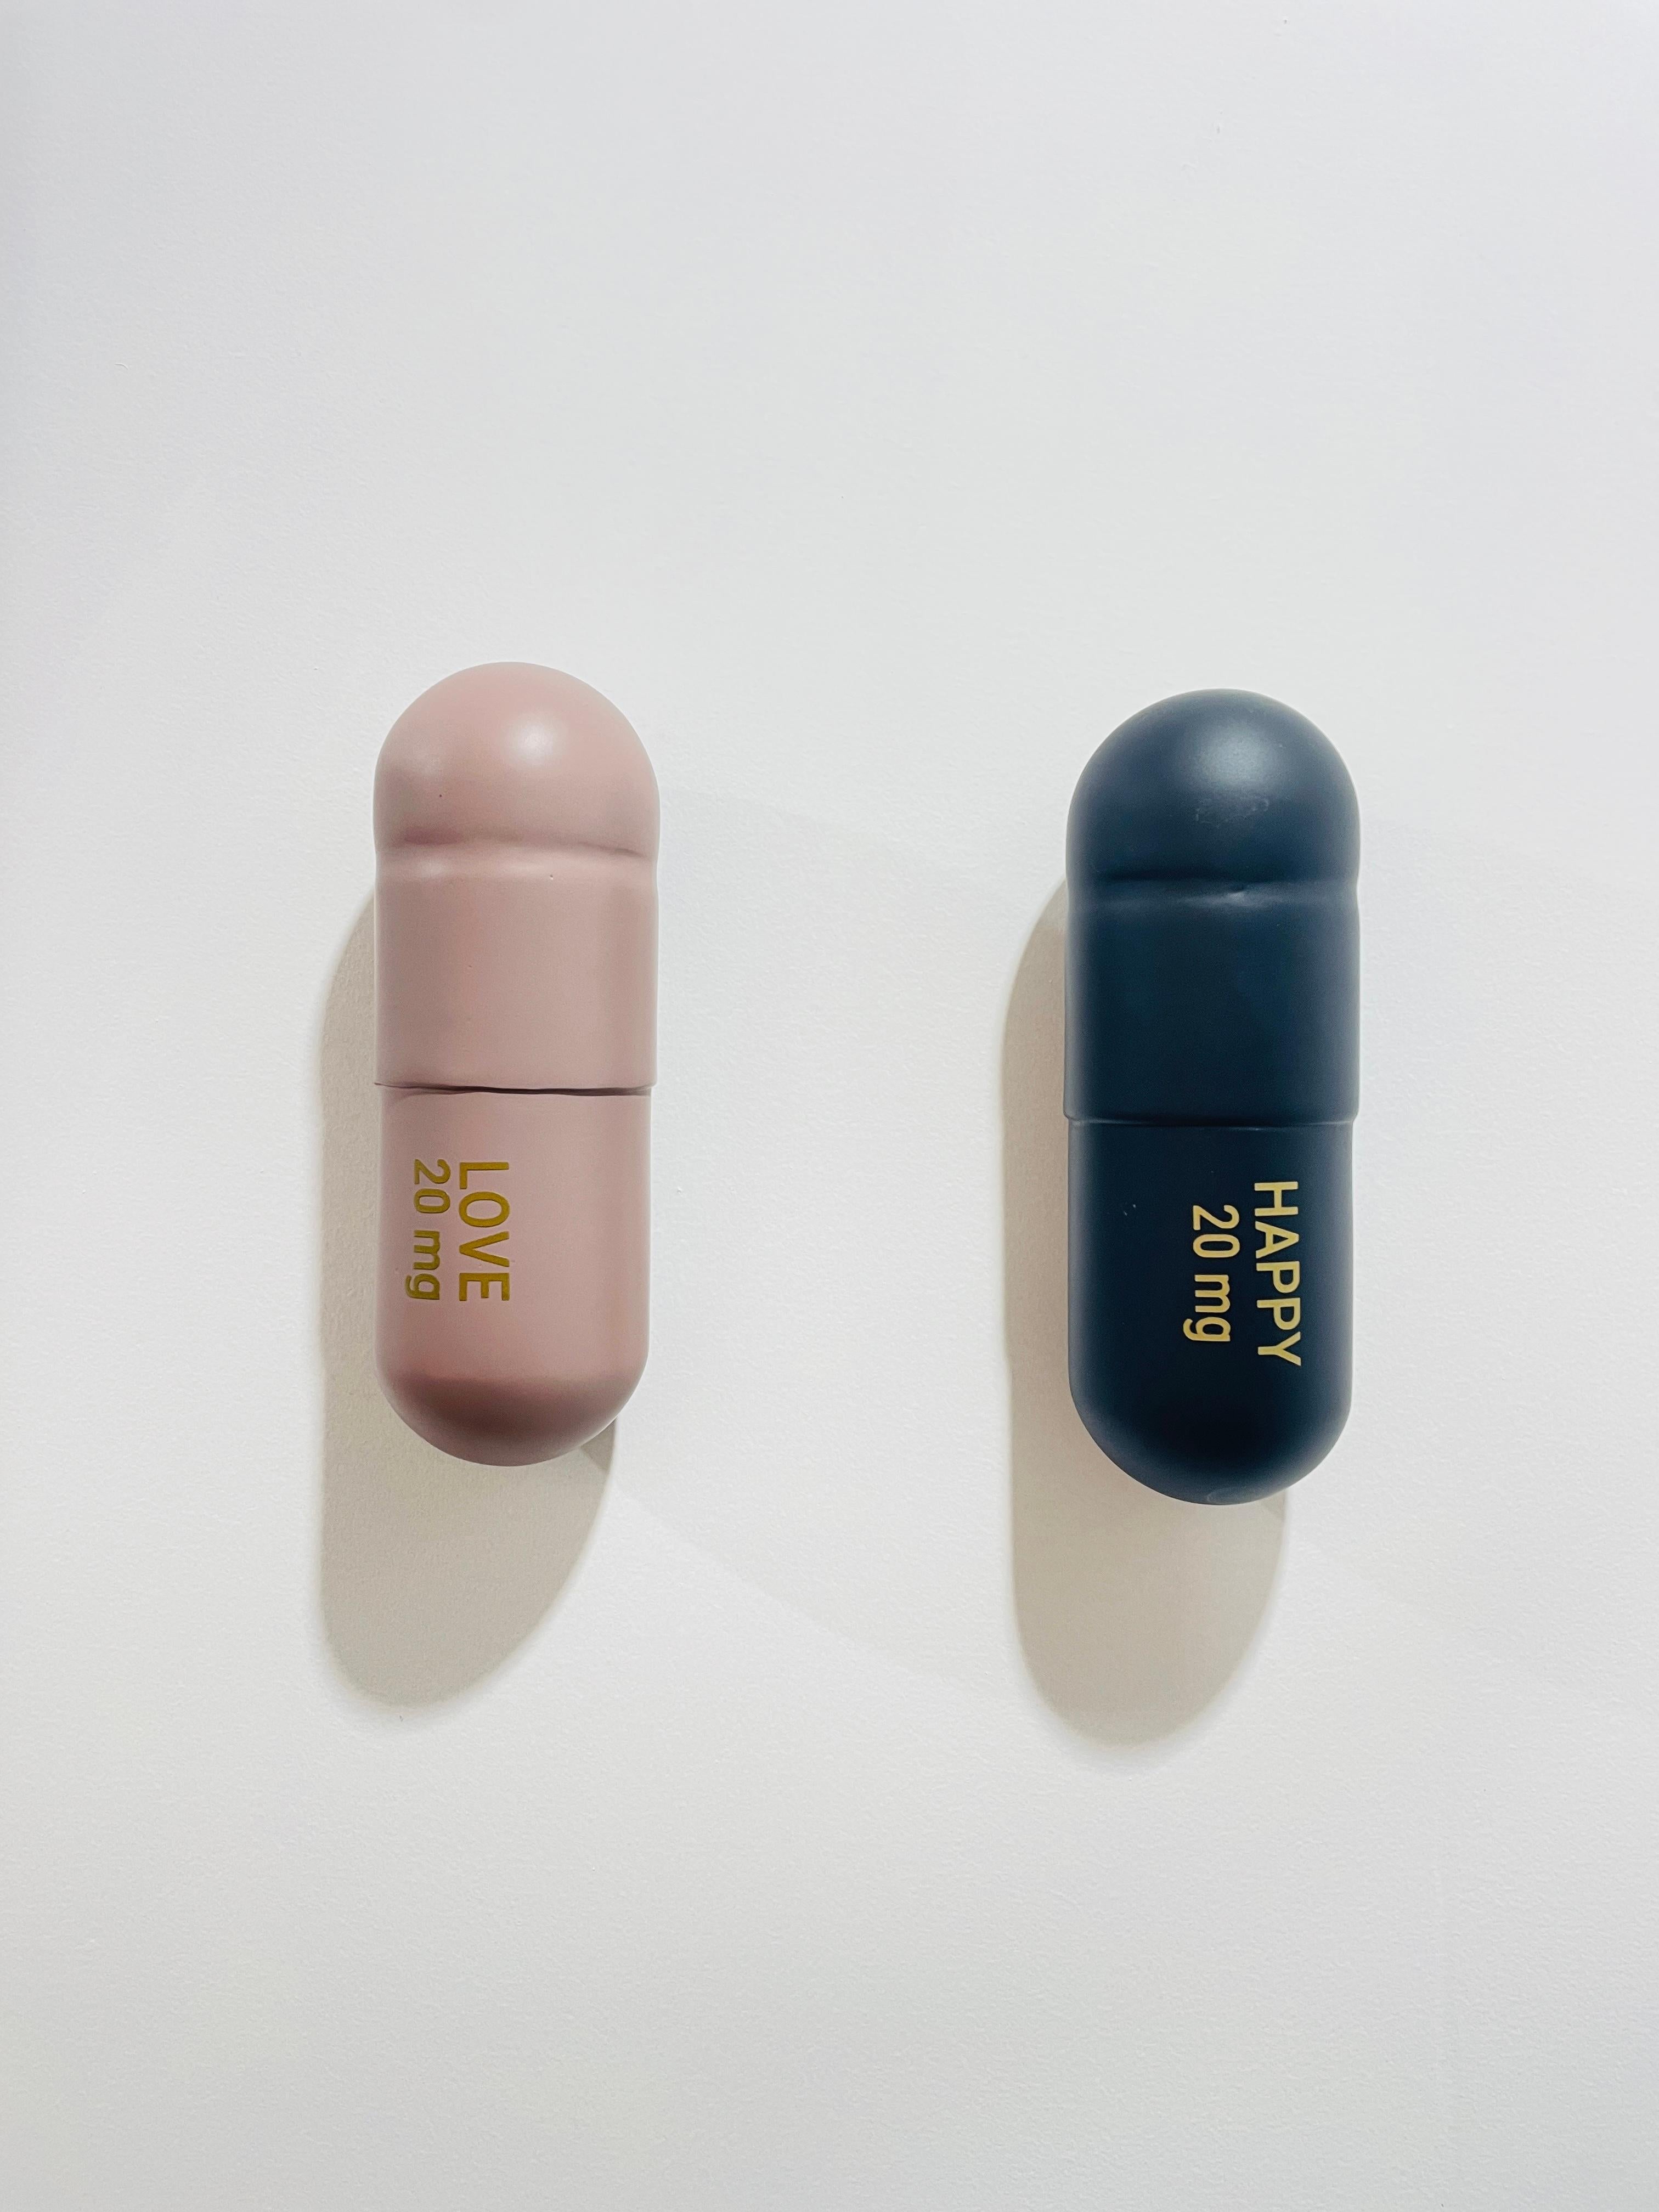 20 ML Love Happy pill Combo (Matte Black and powder pink) - figurative sculpture - Sculpture by Tal Nehoray